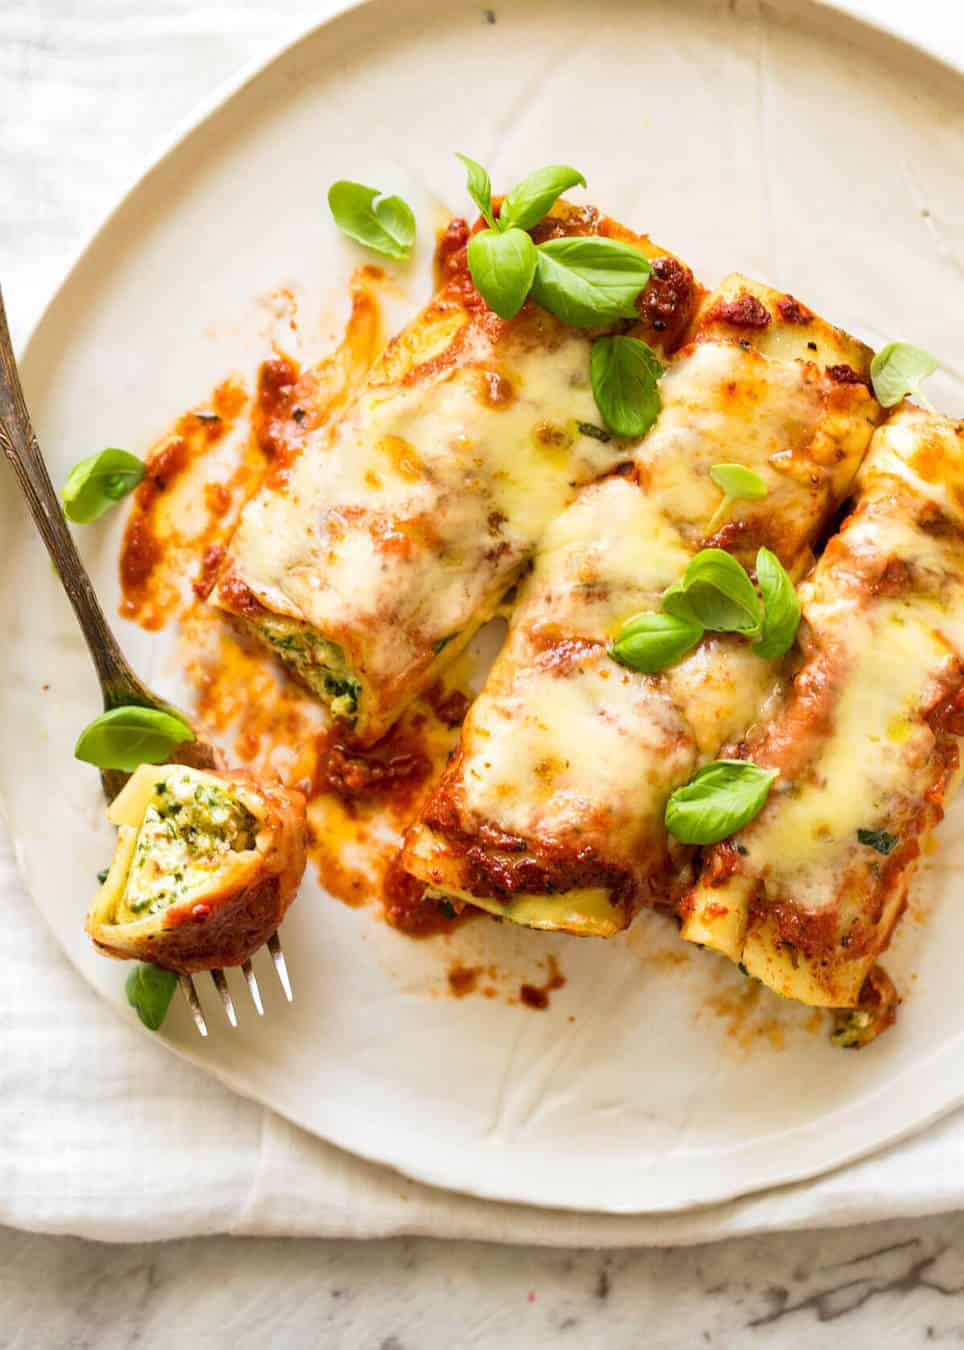 Imagine coming home to this Spinach Ricotta Cannelloni.... www.recipetineats.com